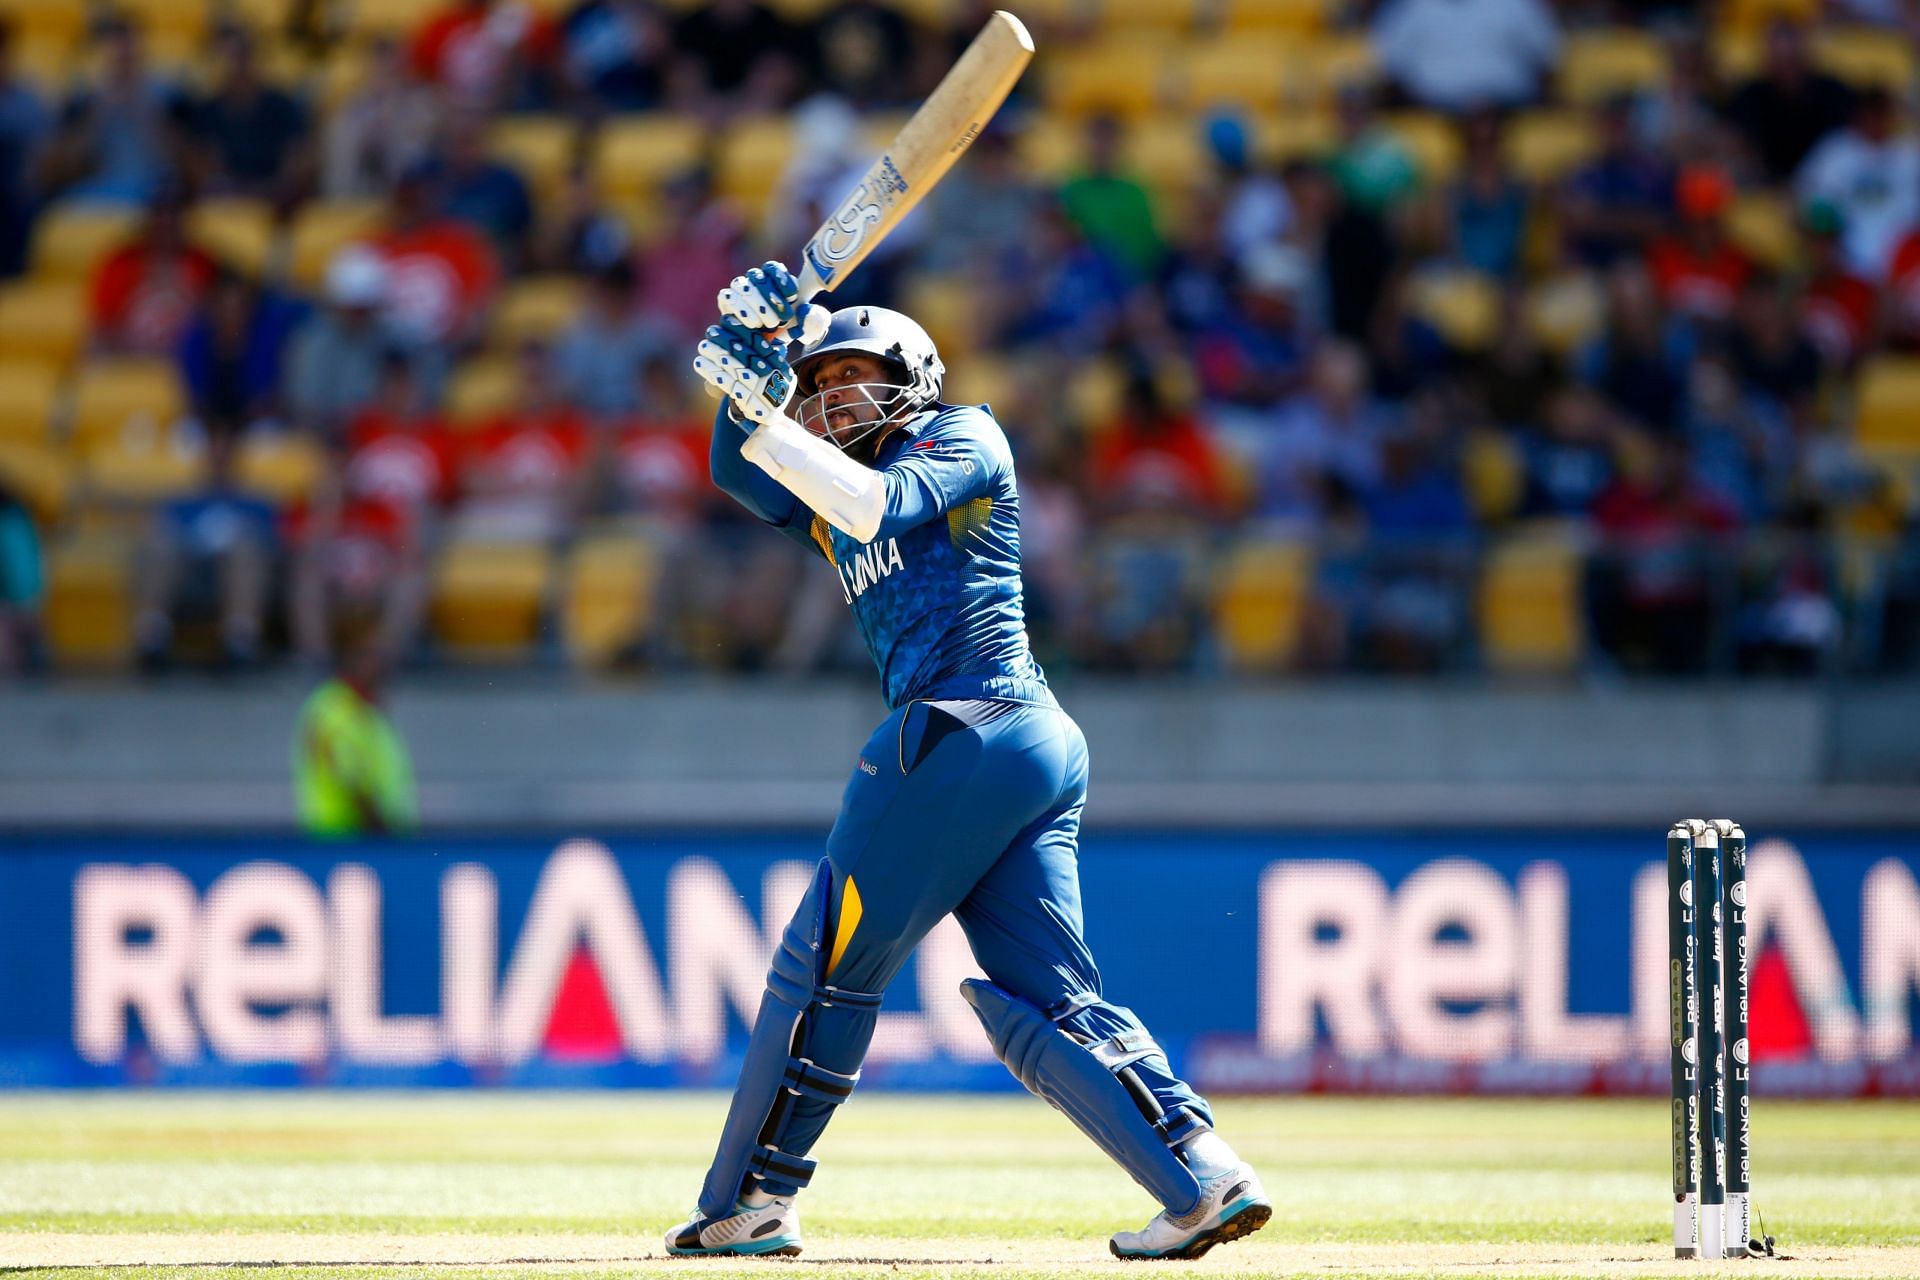 Dilshan will look to score some valuable runs with the bat for his side.